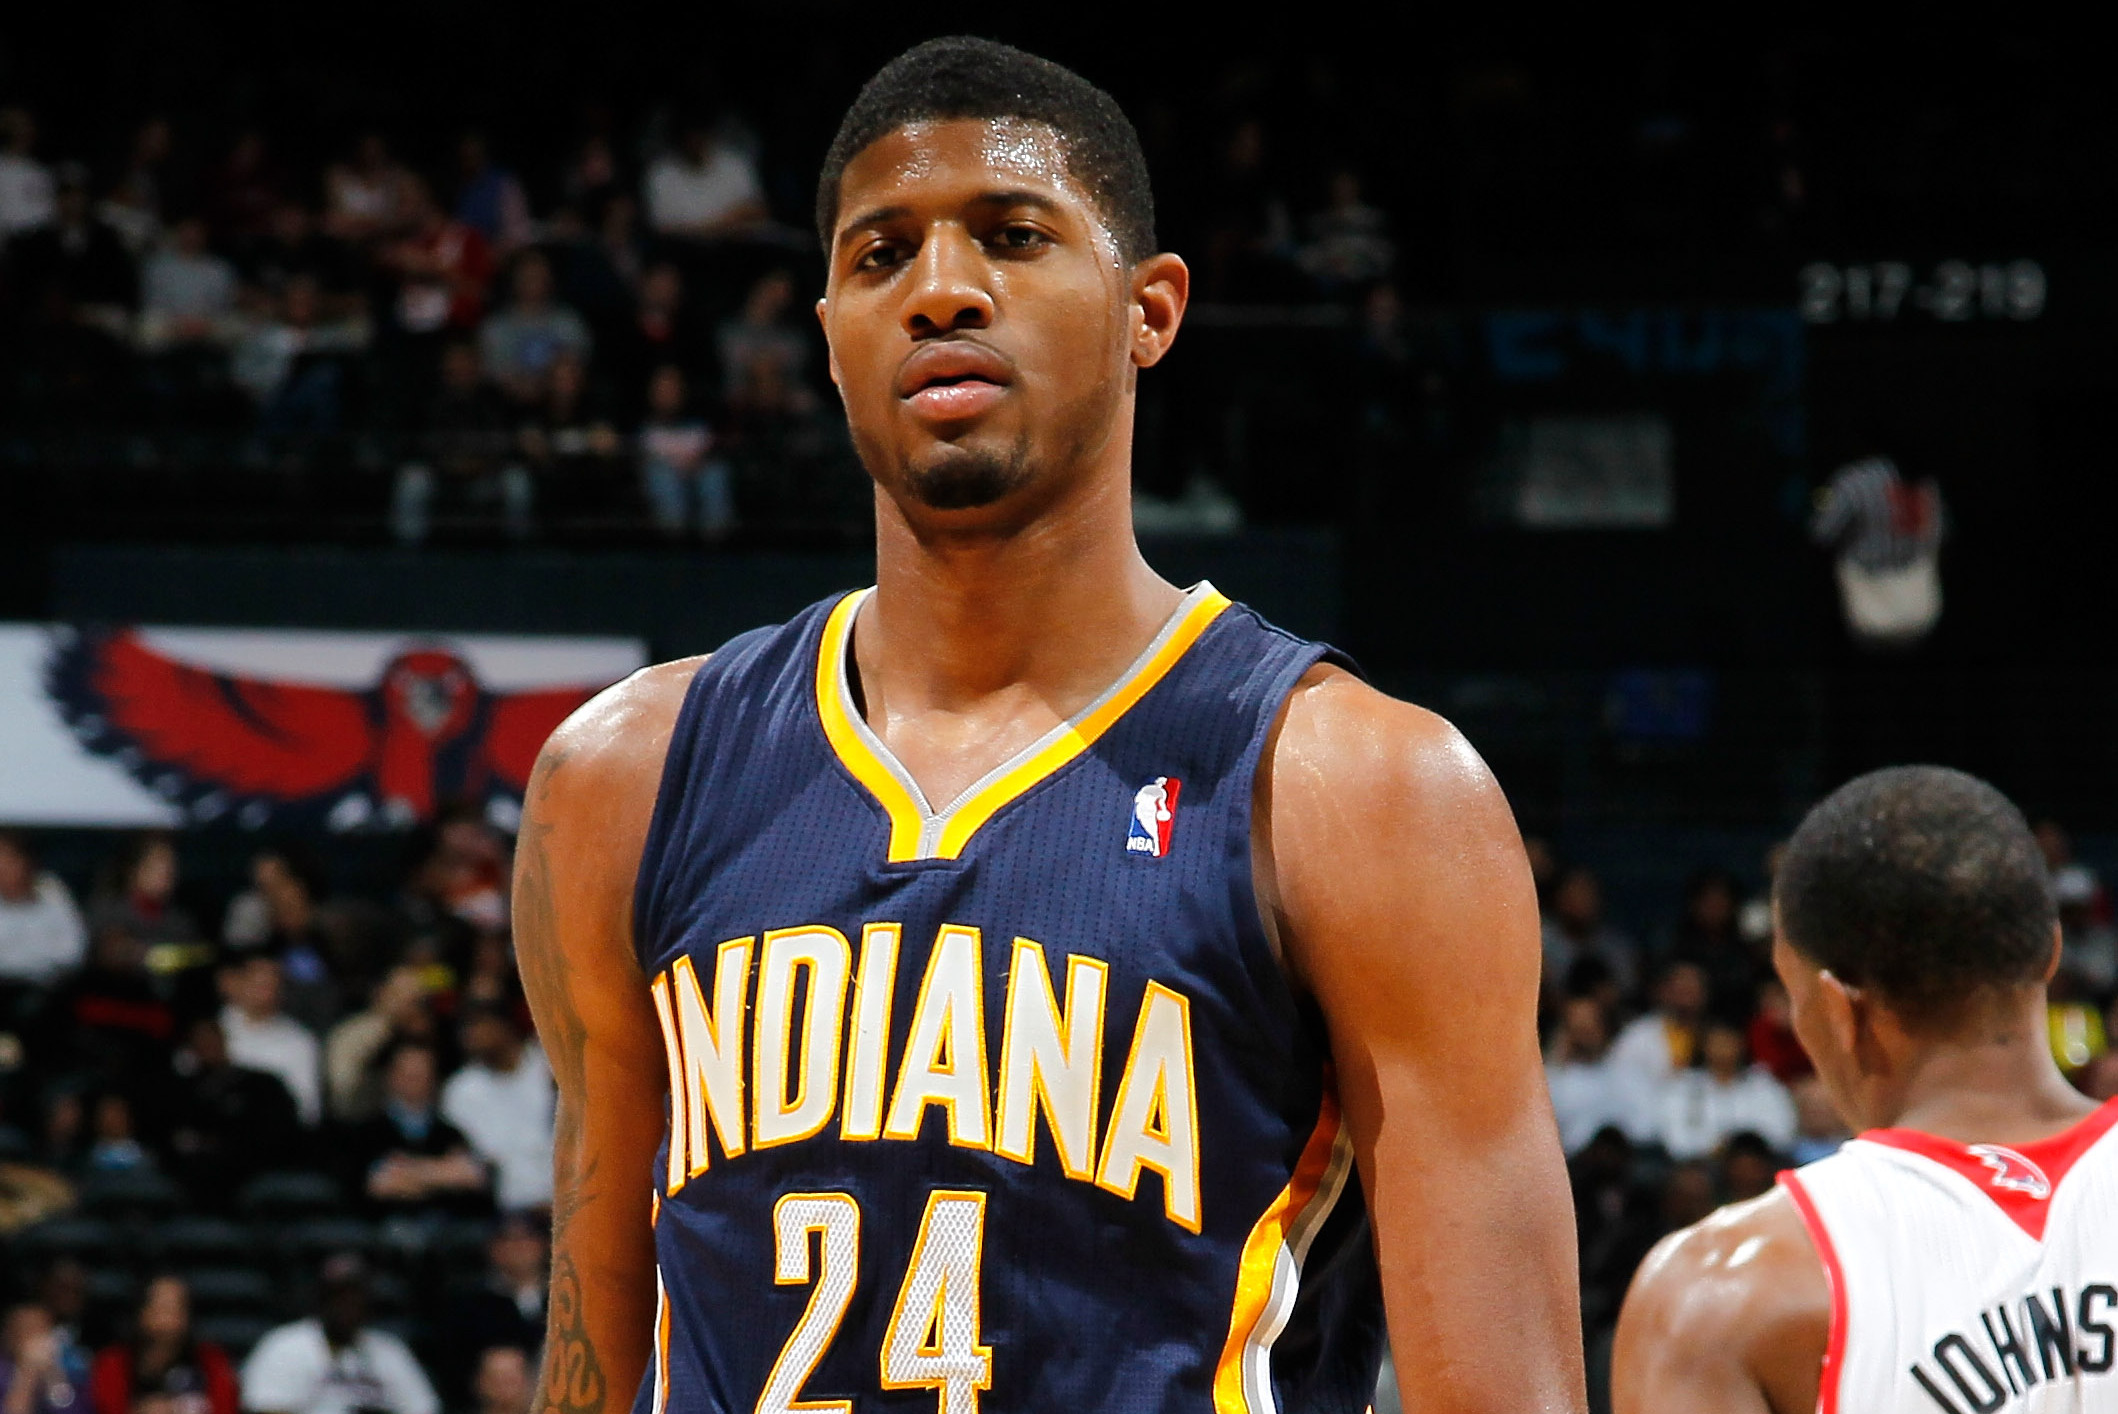 Paul George: Indiana's Swingman Is More Than Just a Dunker